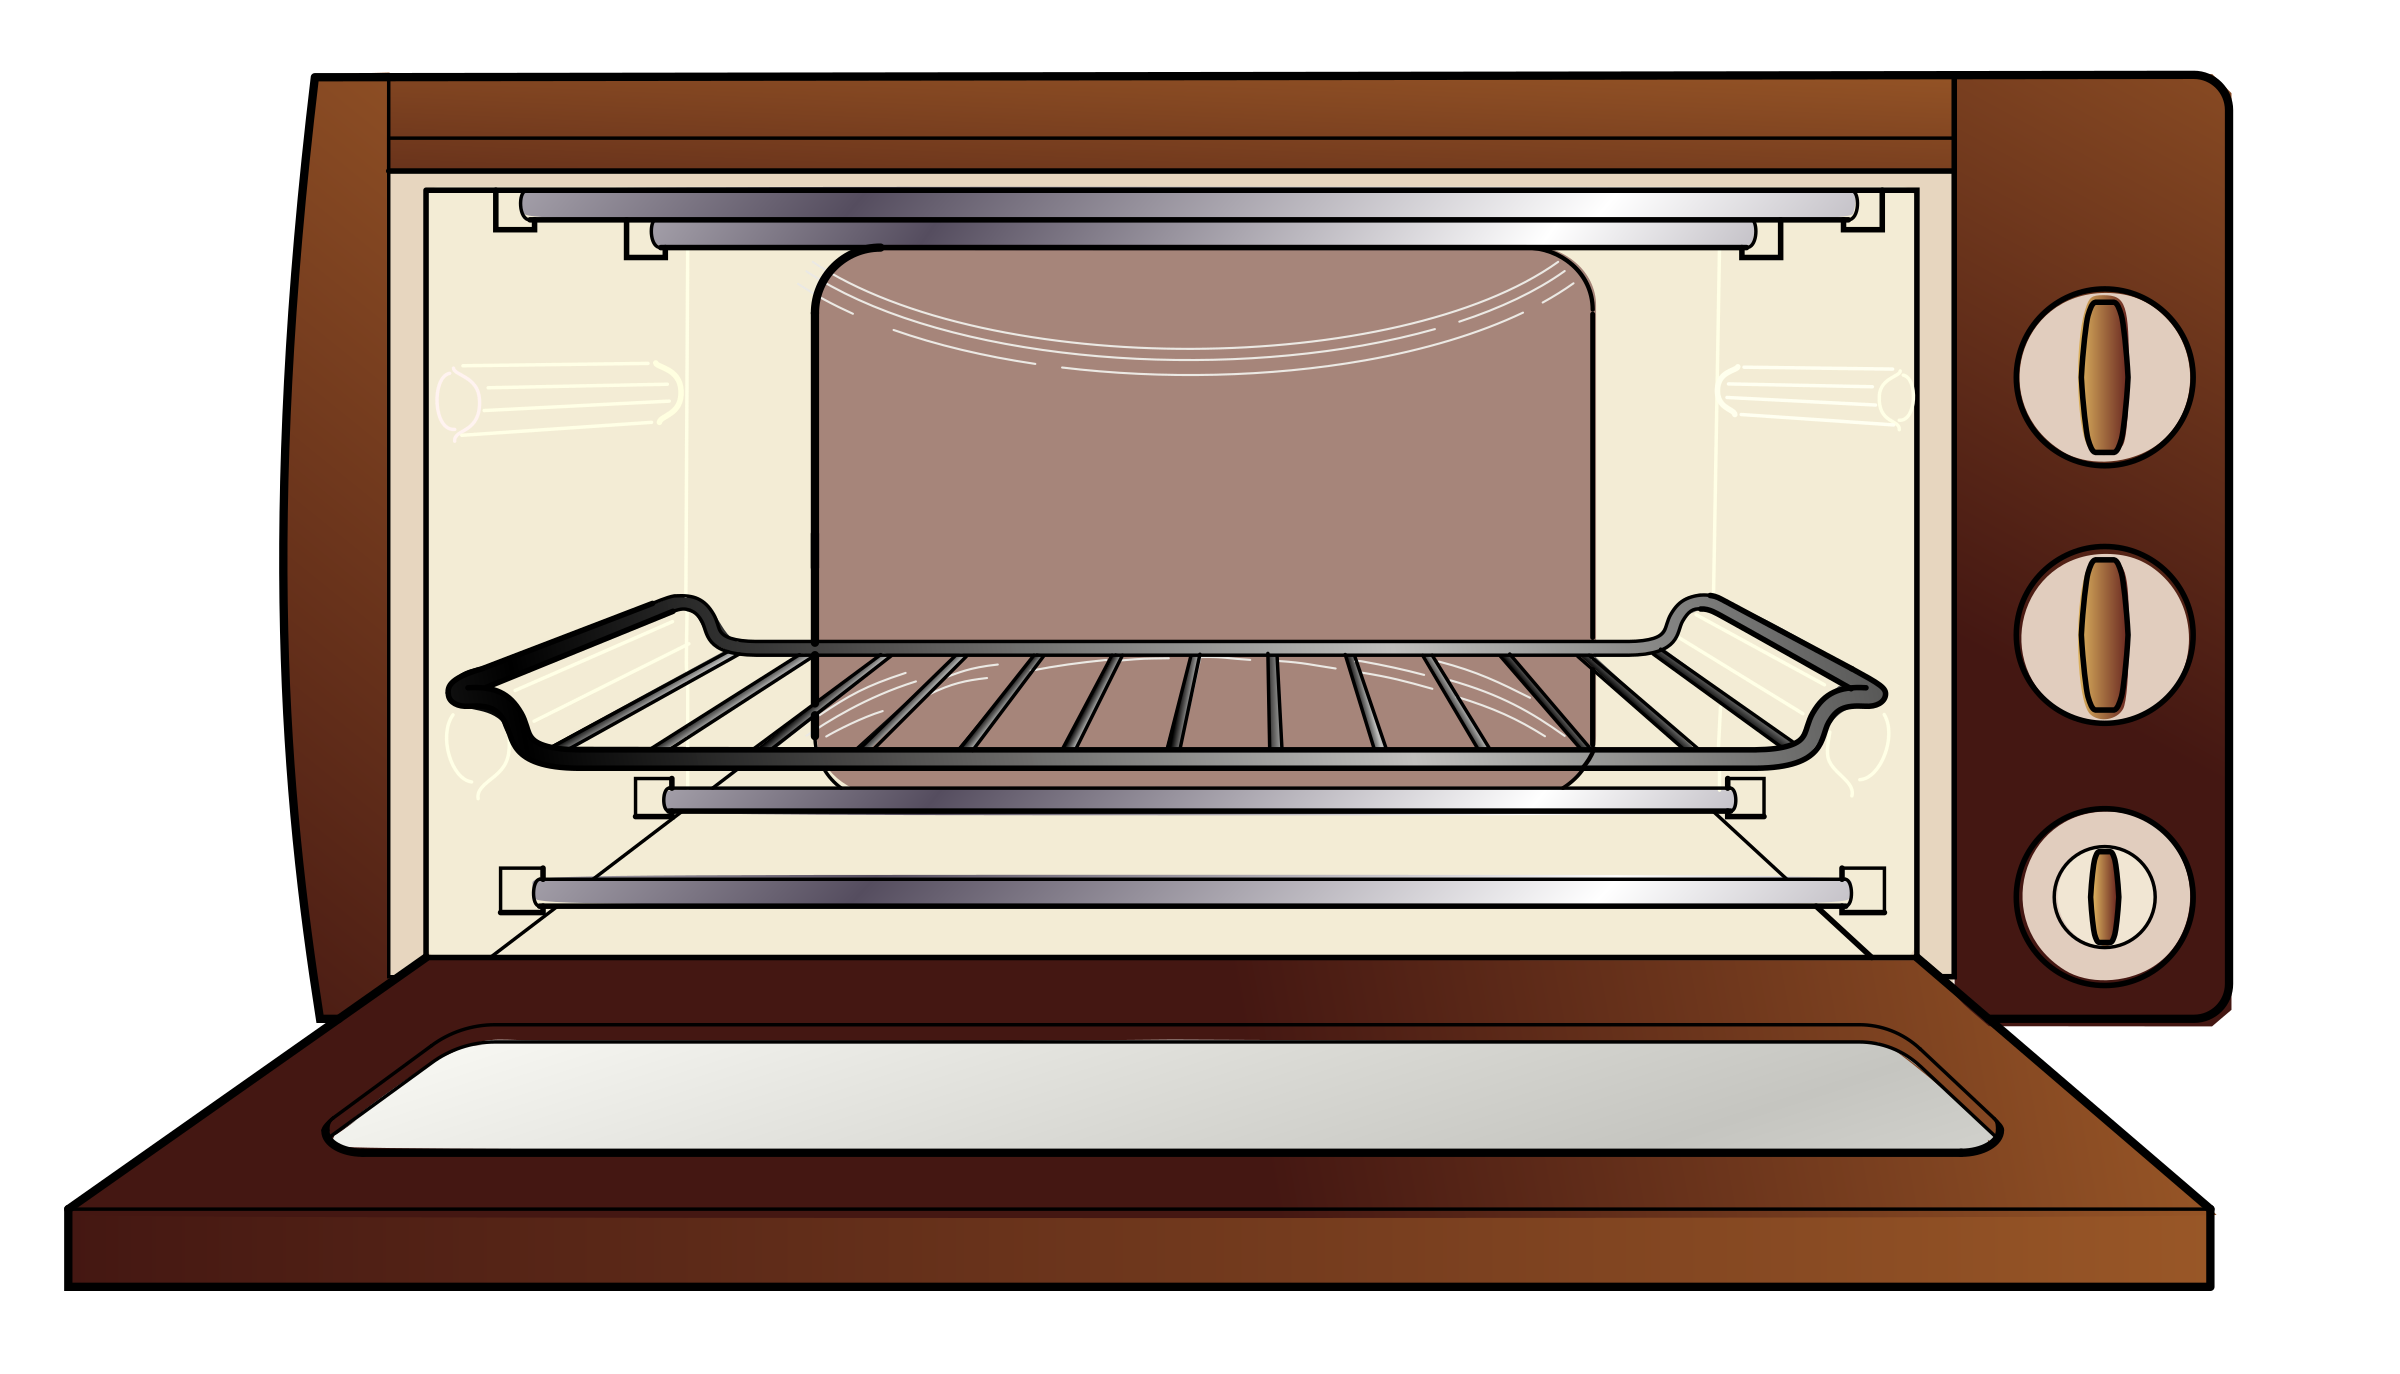 Oven clipart cartoon, Oven cartoon Transparent FREE for ...